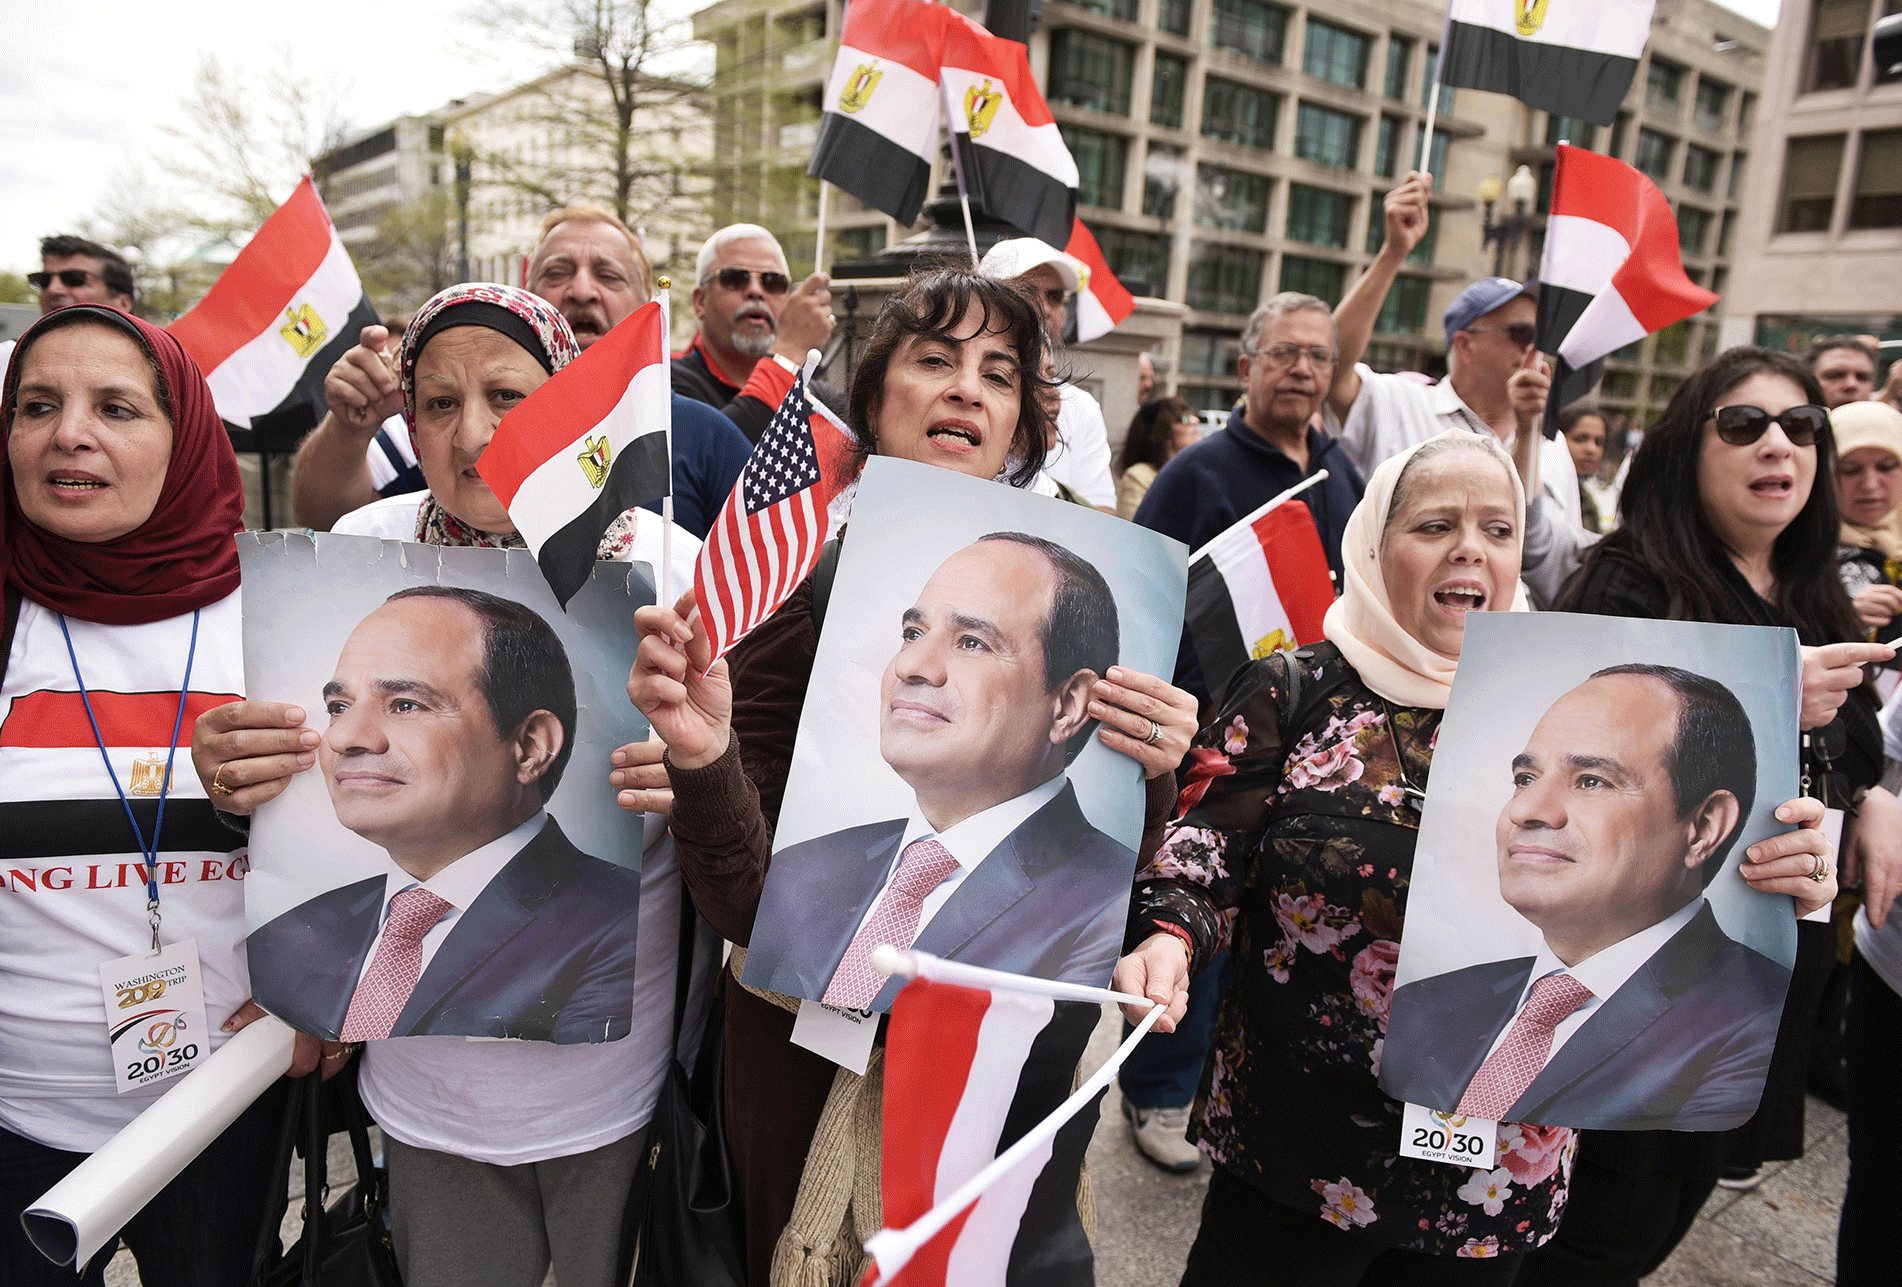 Egypt’s Al-Sisi Visits White House, Spared Human Rights Inquiries